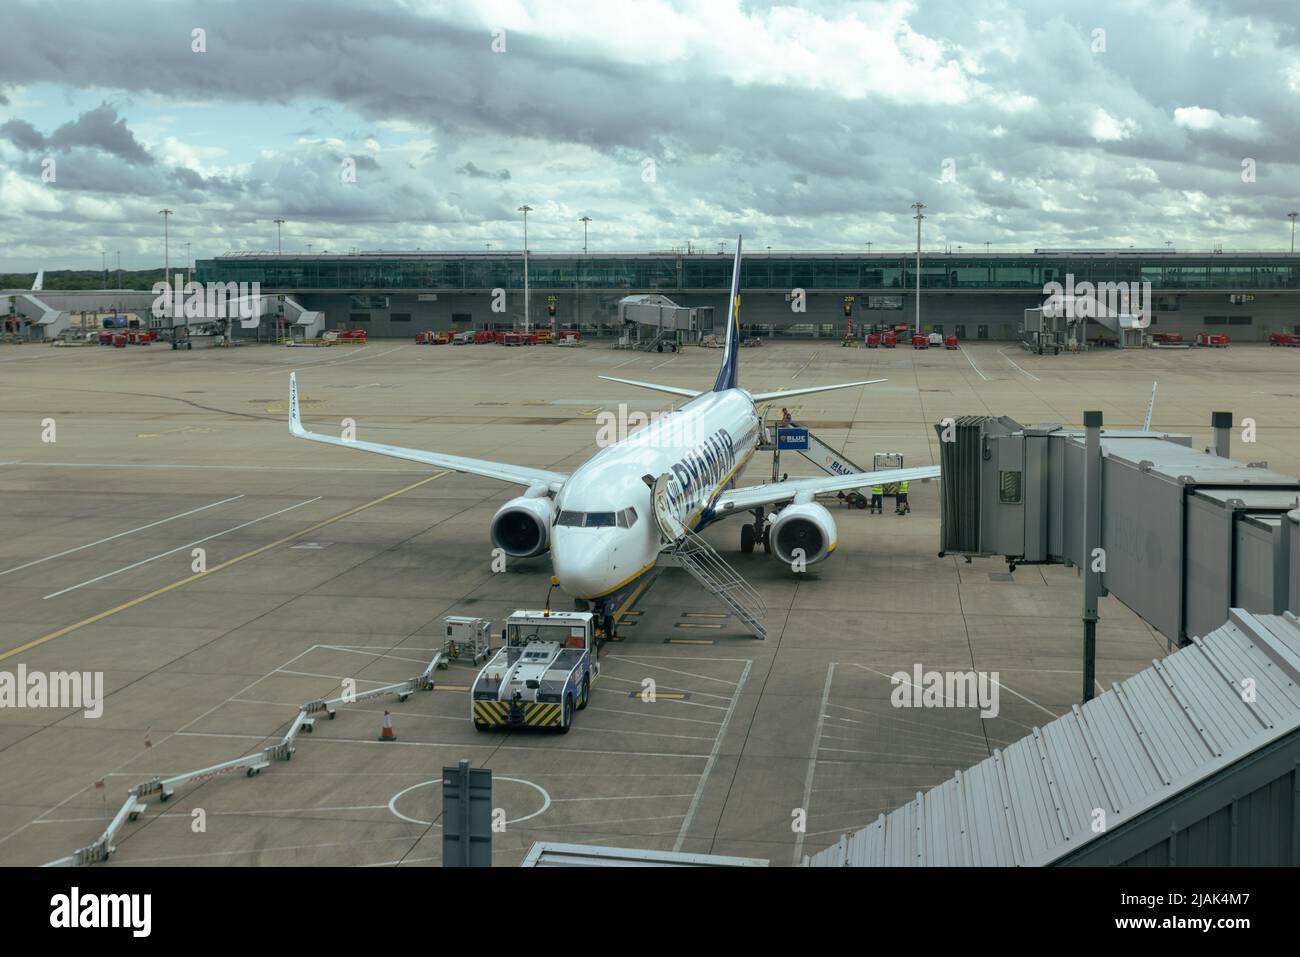 Ryanair airplane at London Stansted airport tarmac while vehicle is fuelling the aircraft Stock Photo